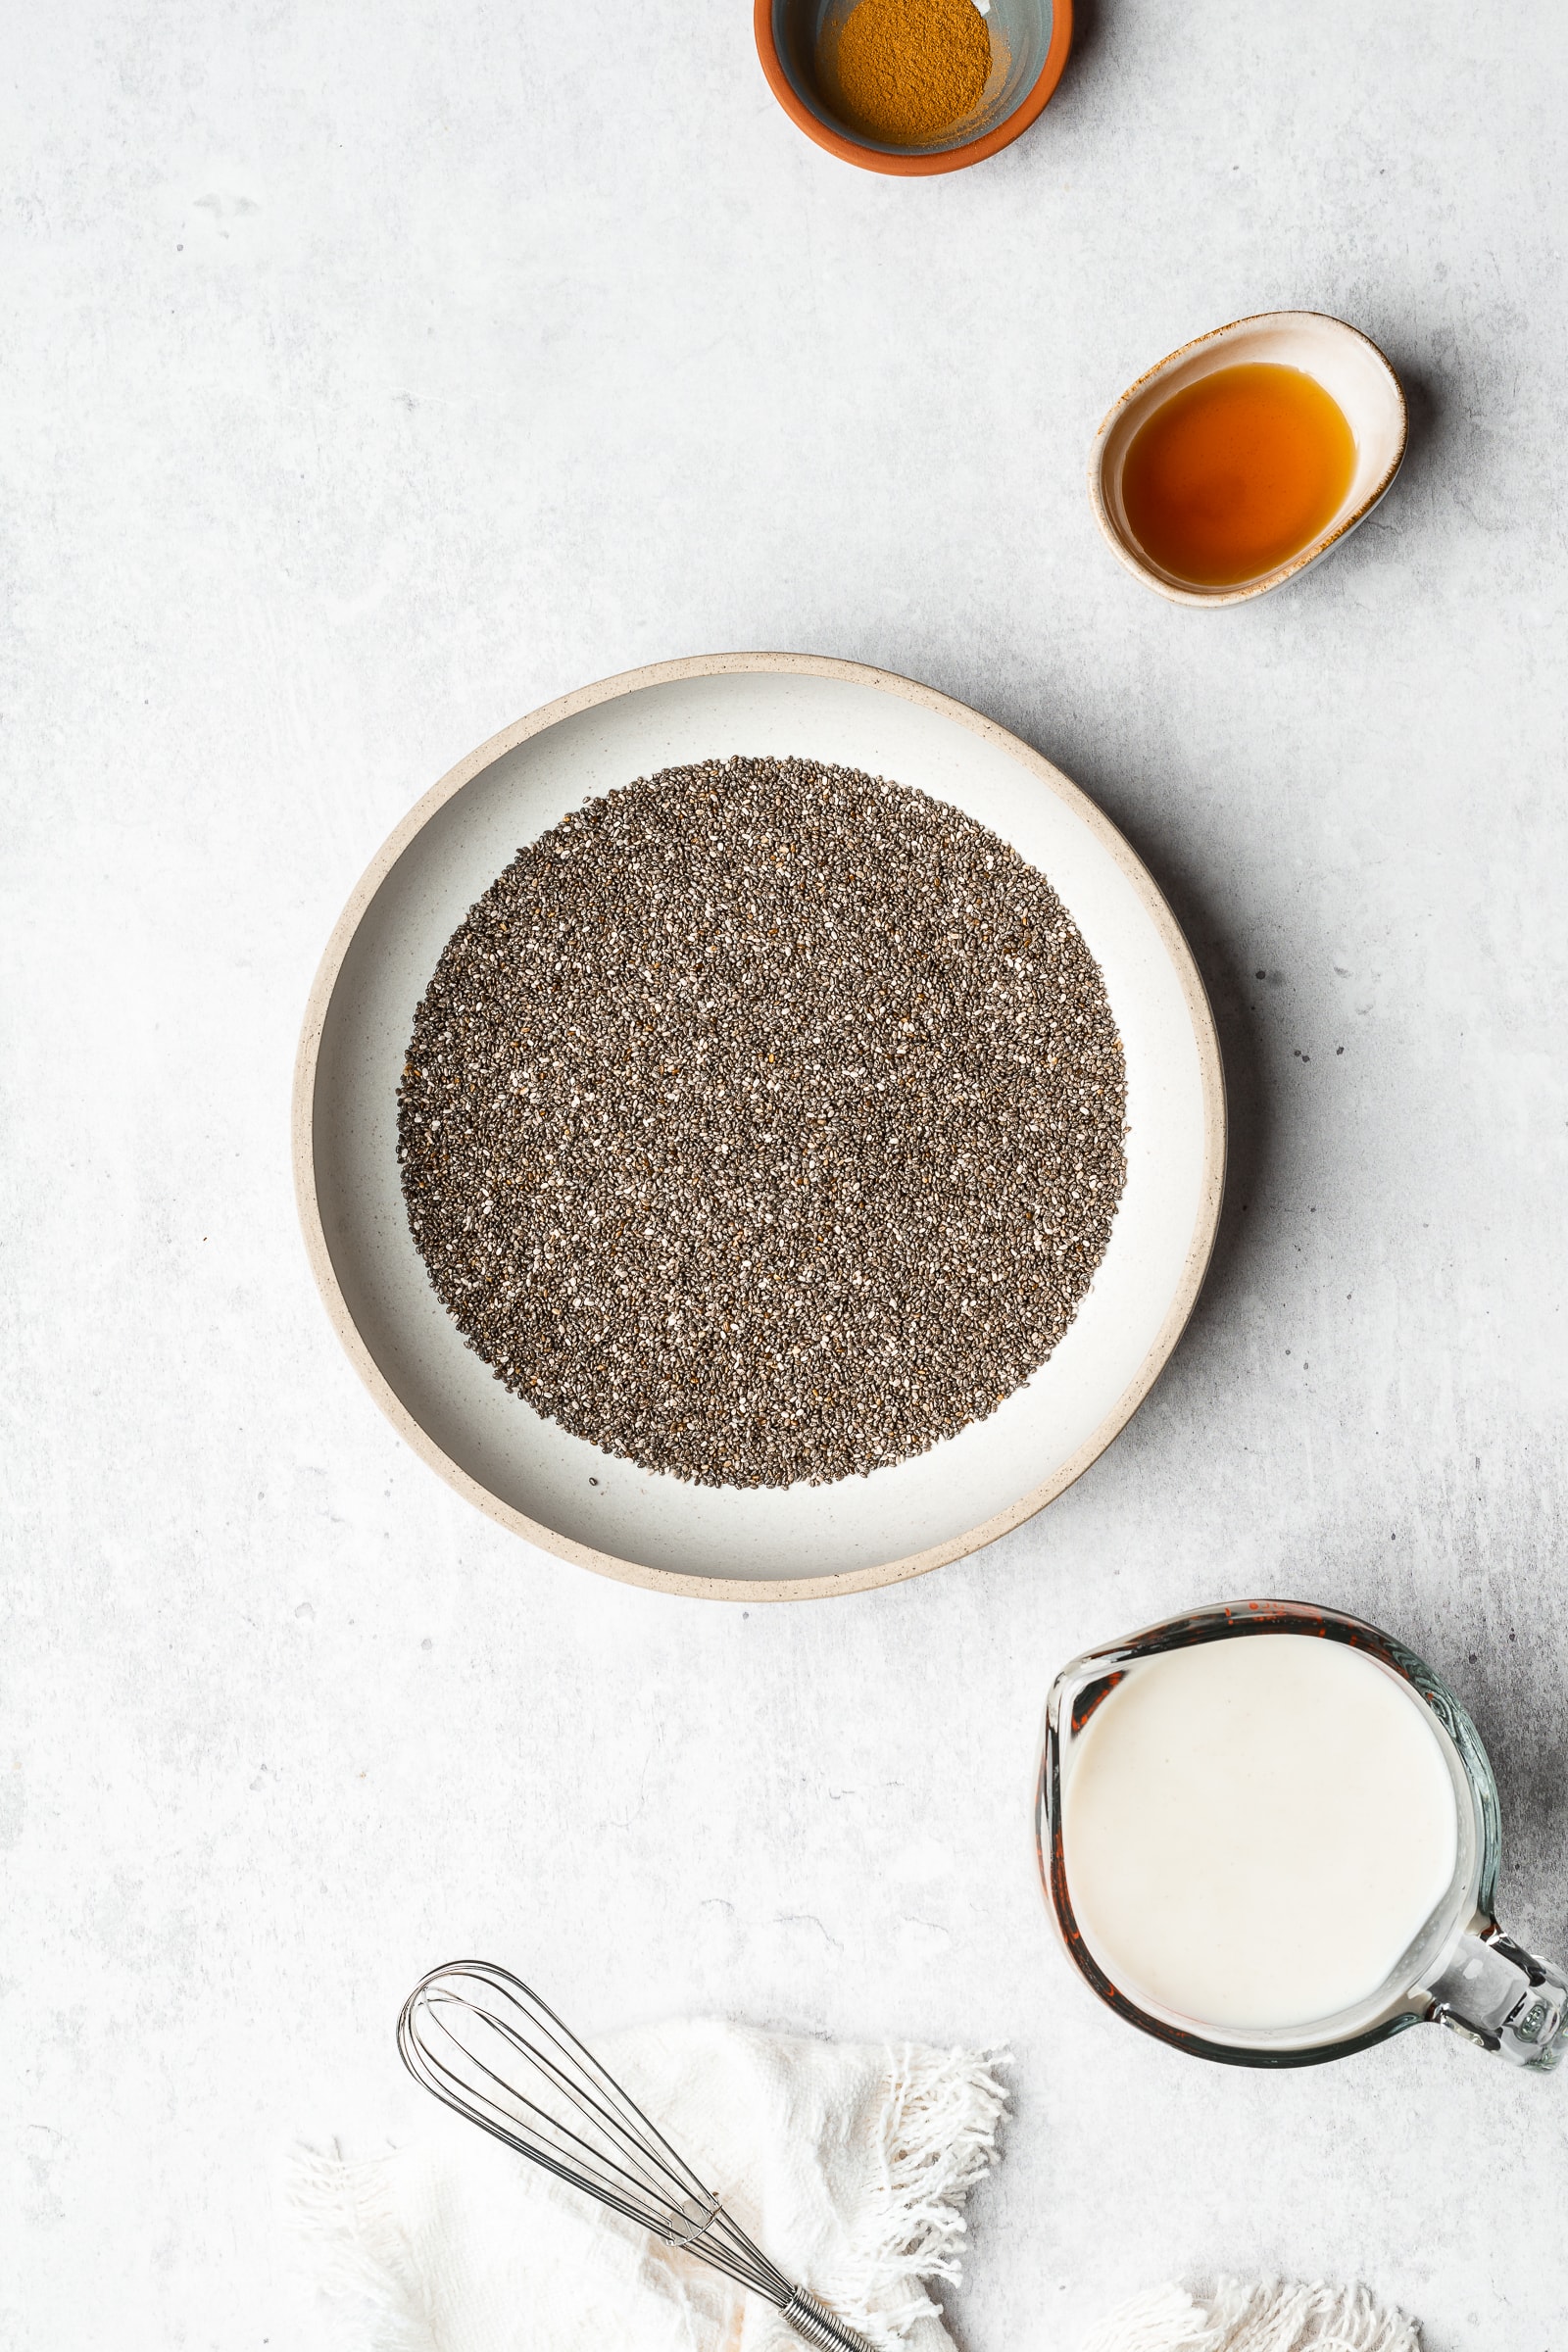 Chia seed with oat milk ingredients on a gray backdrop.